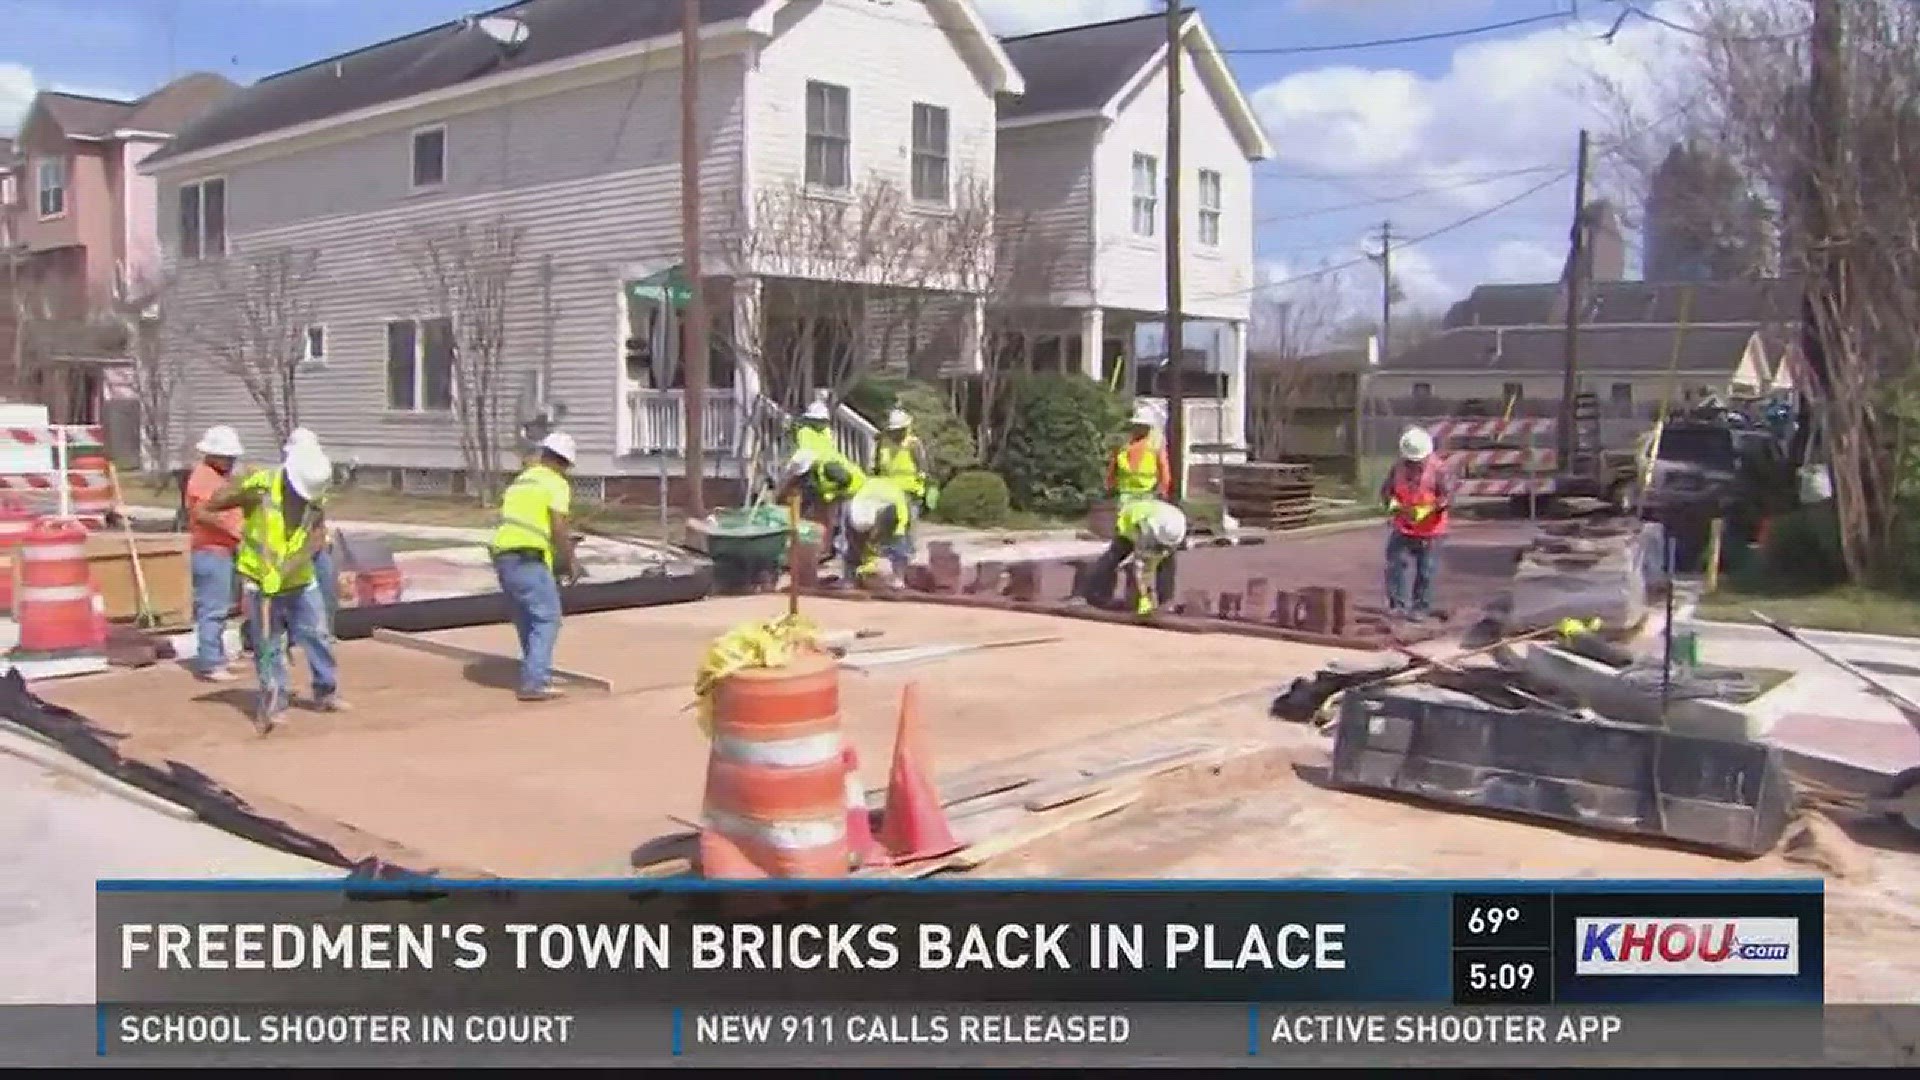 The historic bricks were accidentally damaged in November 2016 by city contractors.